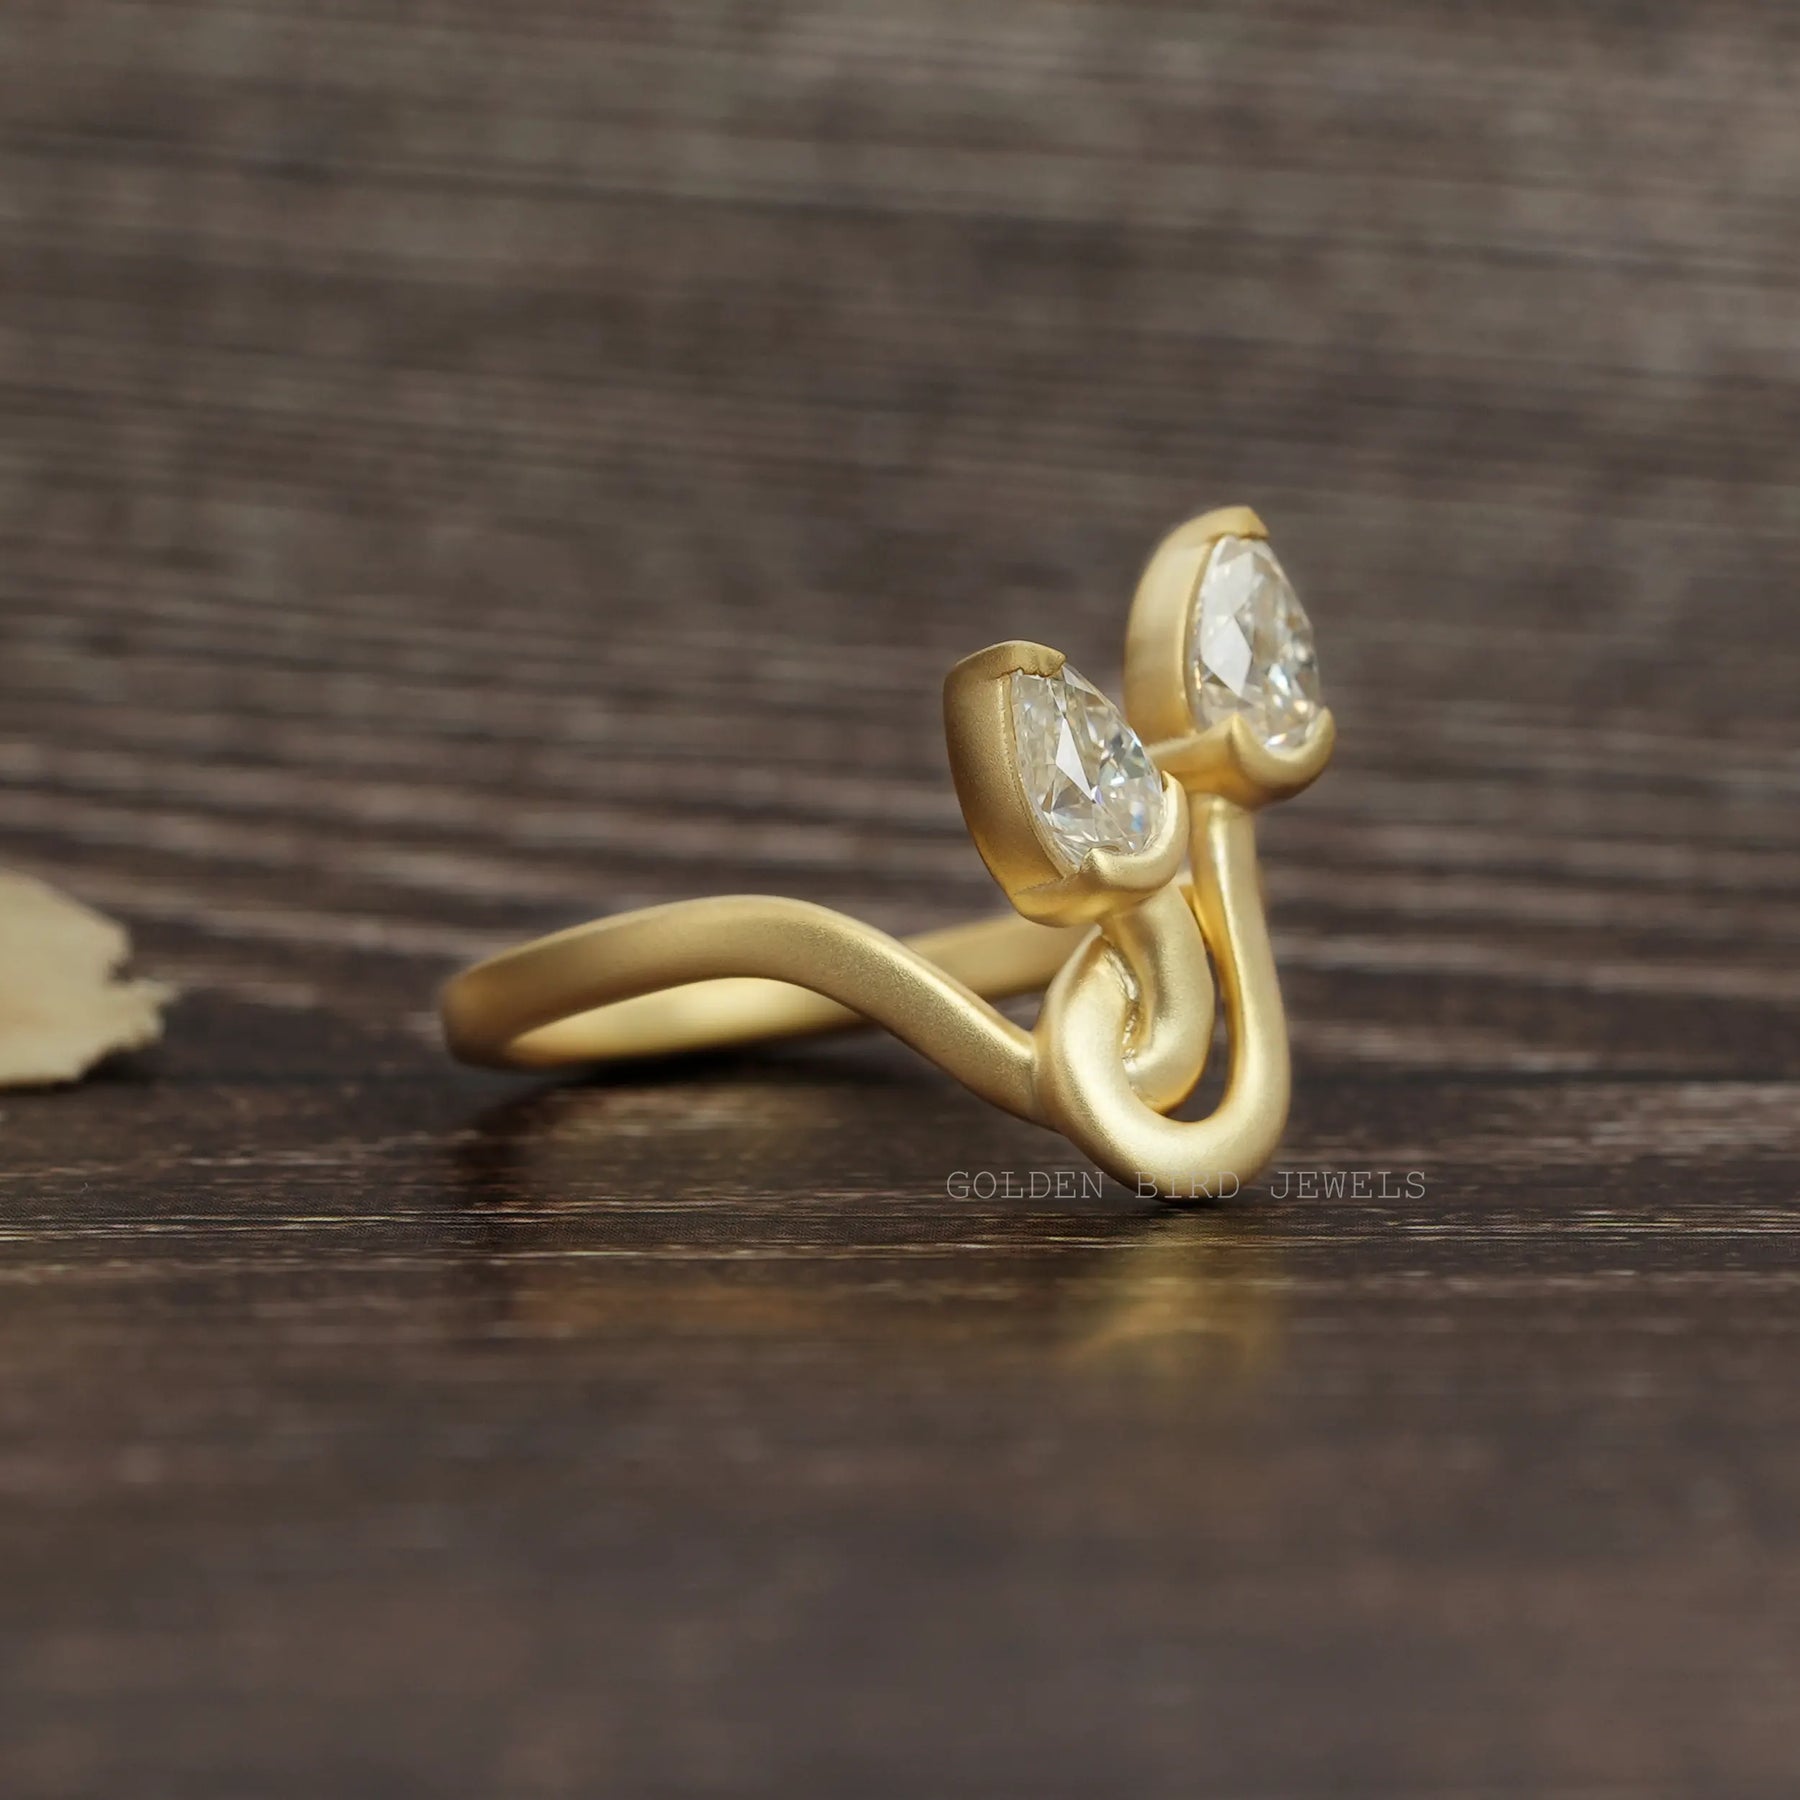 [Toi Moi Pear Shaped Vintage Style Curved Ring]-[Golden Bird Jewels]